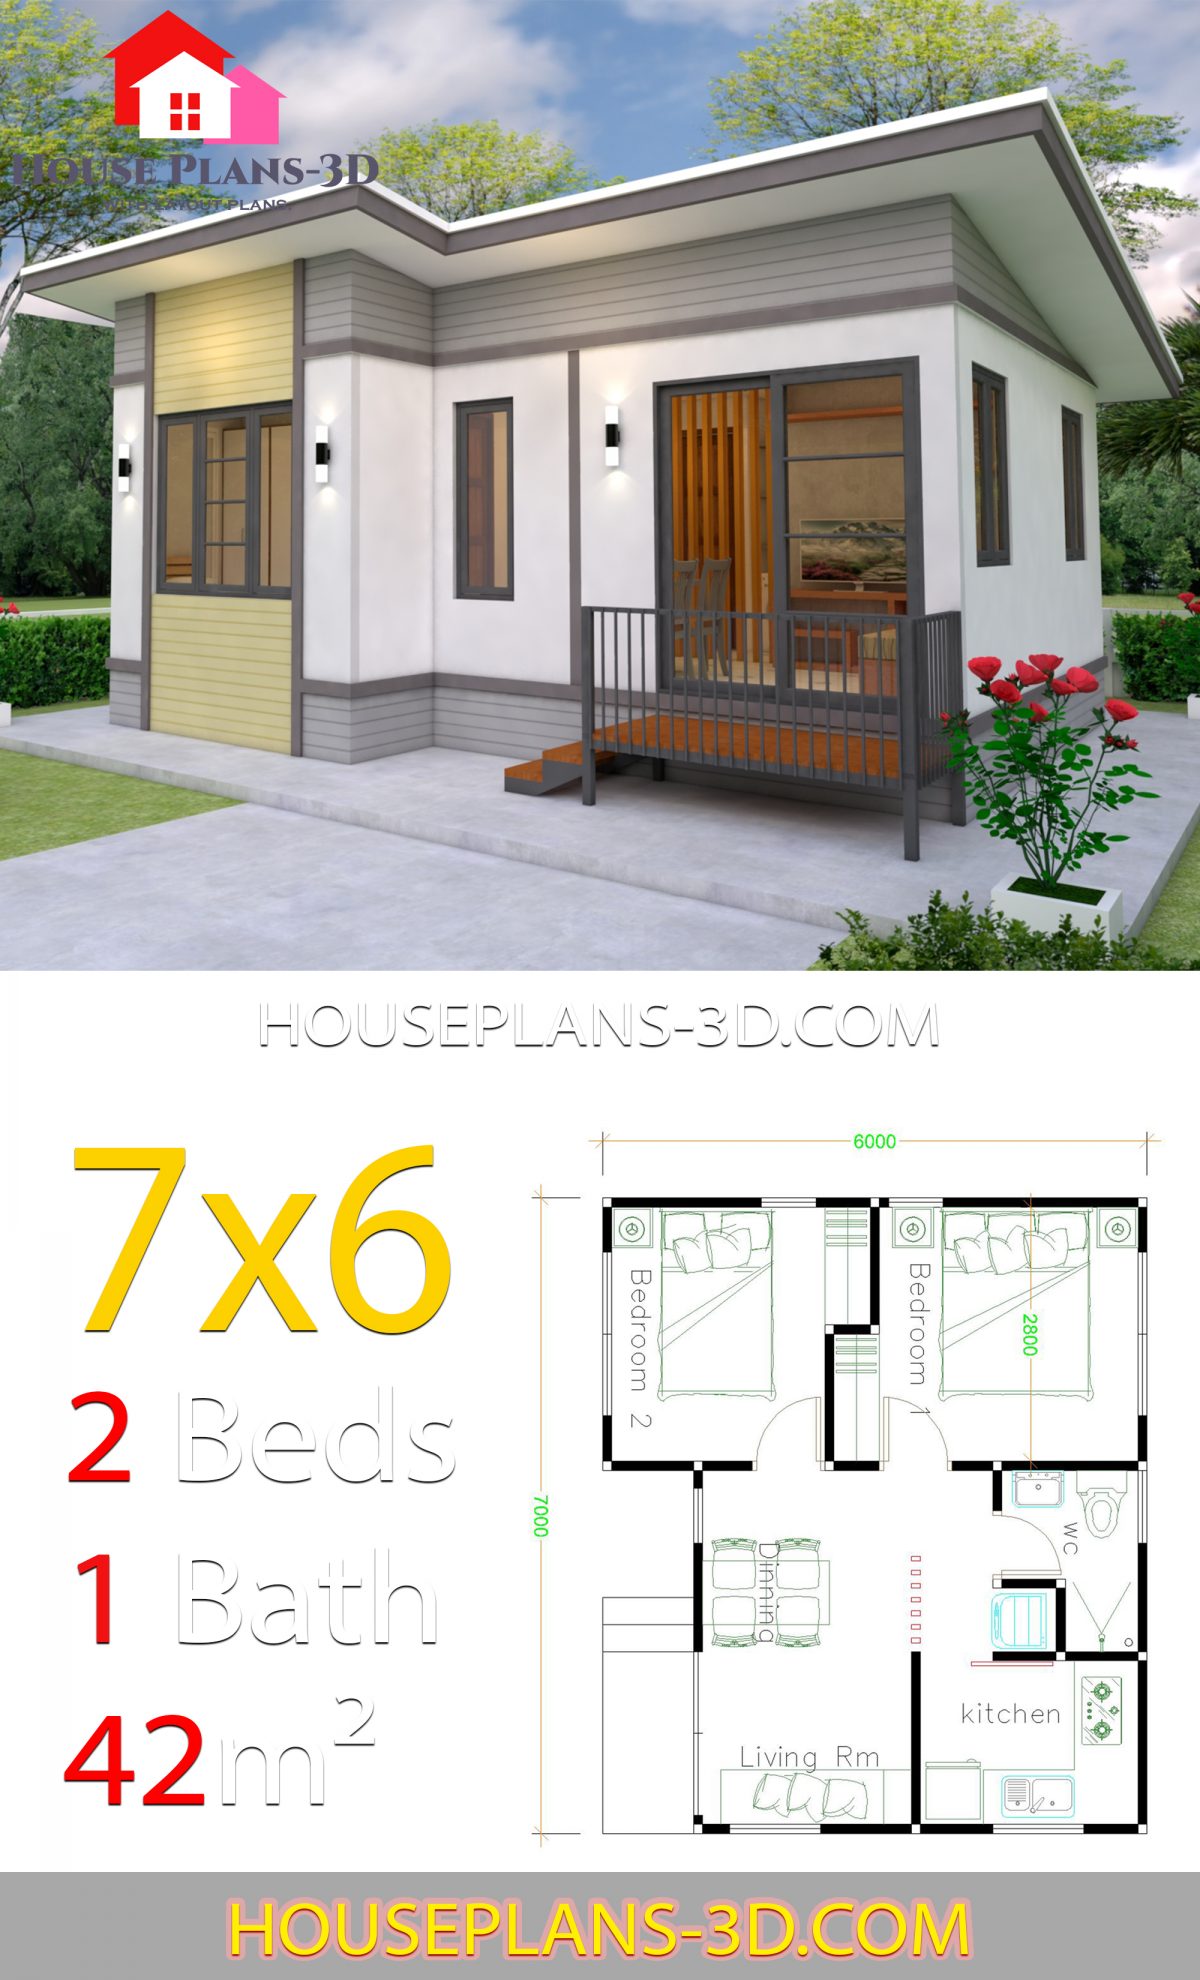 Small House Plans 7x6 With 2 Bedrooms - House Plans 3d 408